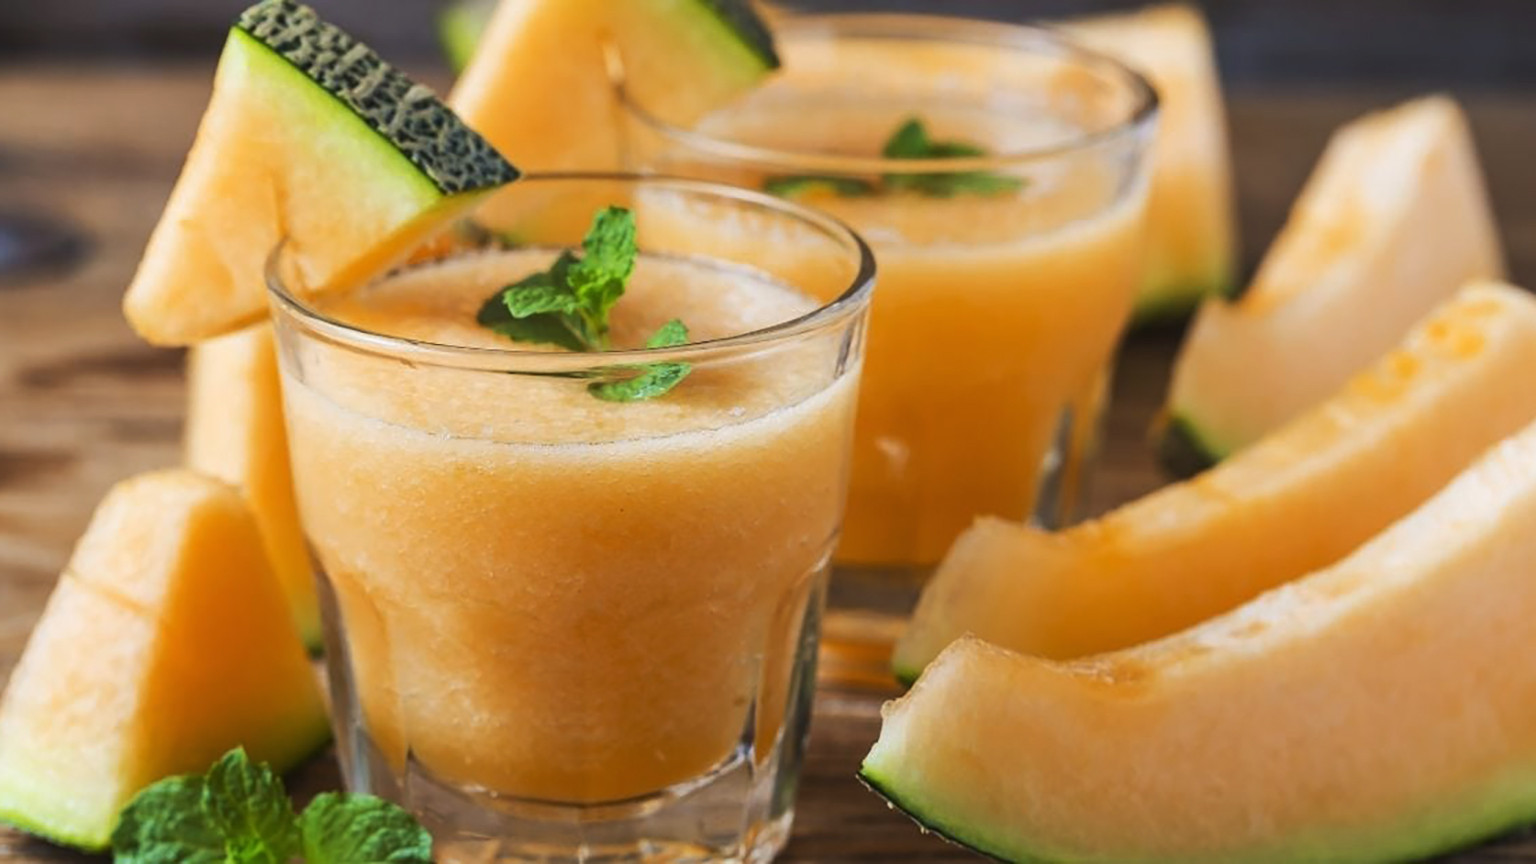 Melon juice: one of the choices for summertime